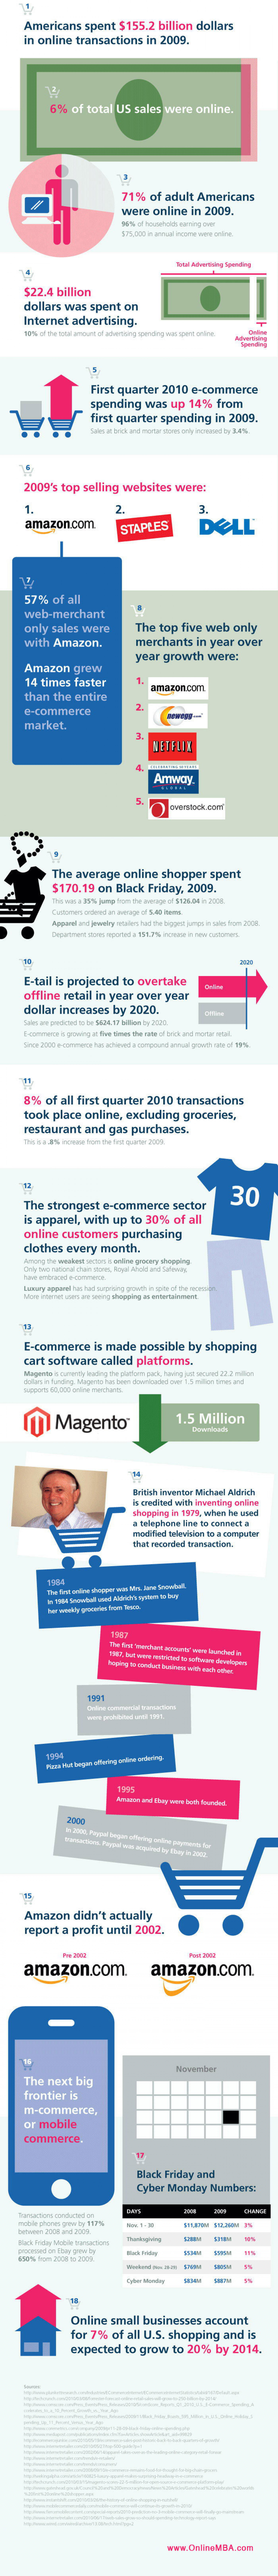 A Look At eCommerce Infographic